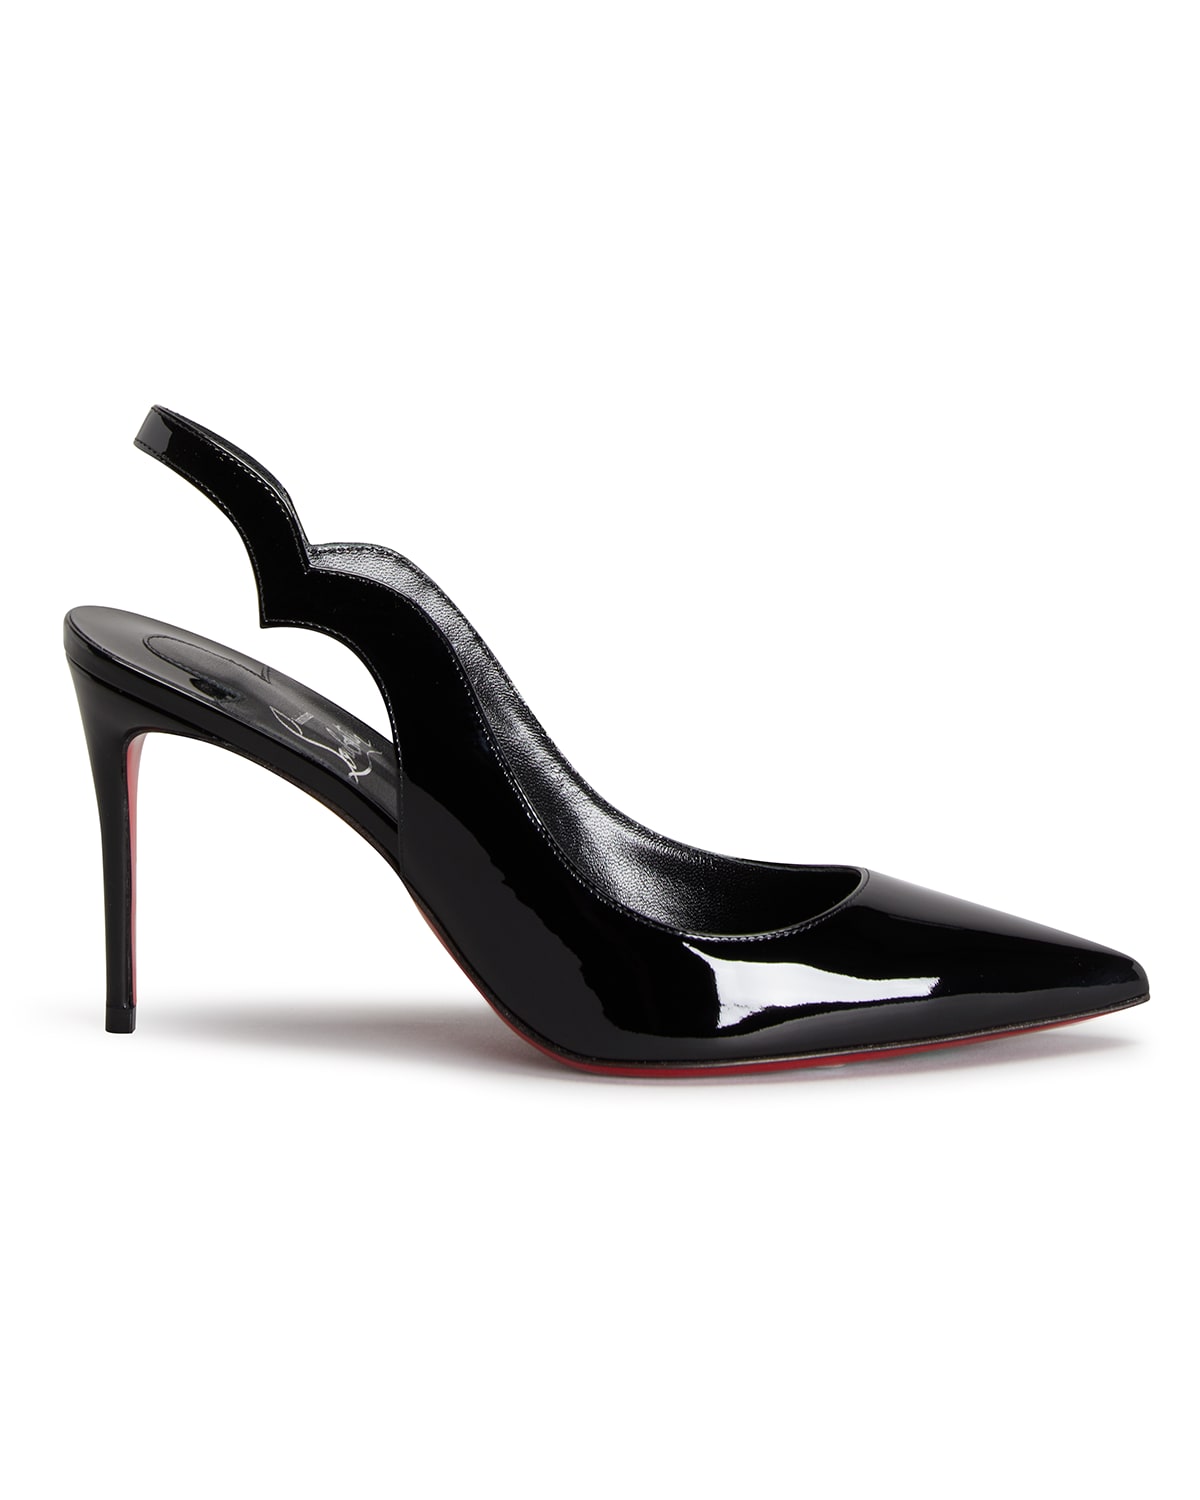 Christian Louboutin Hot Chick Patent Red Sole Slingback Pumps